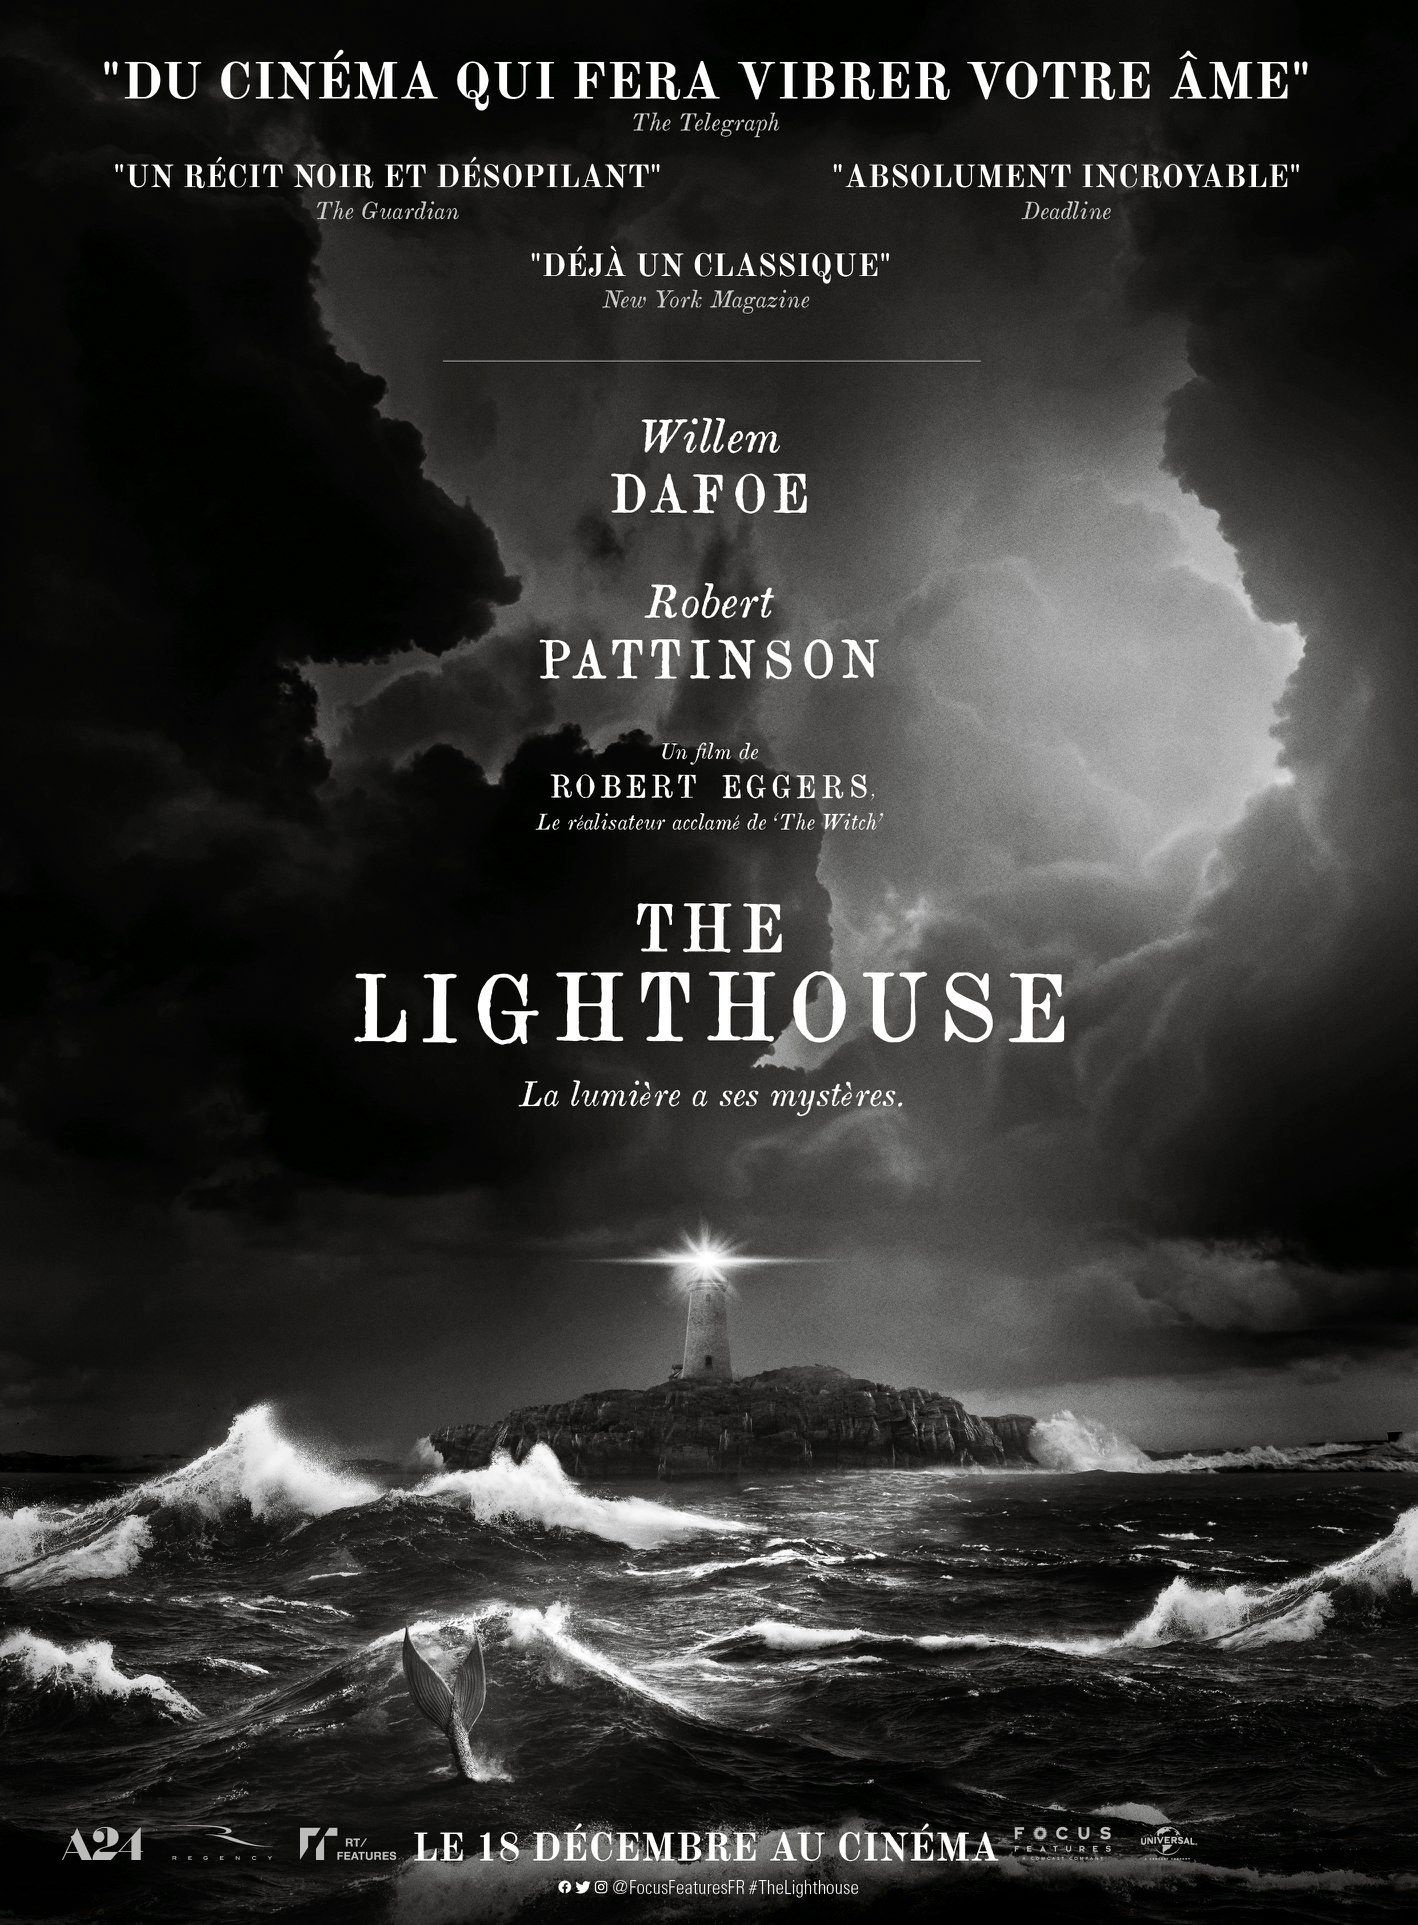 The Lighthouse - Film (2019) streaming VF gratuit complet